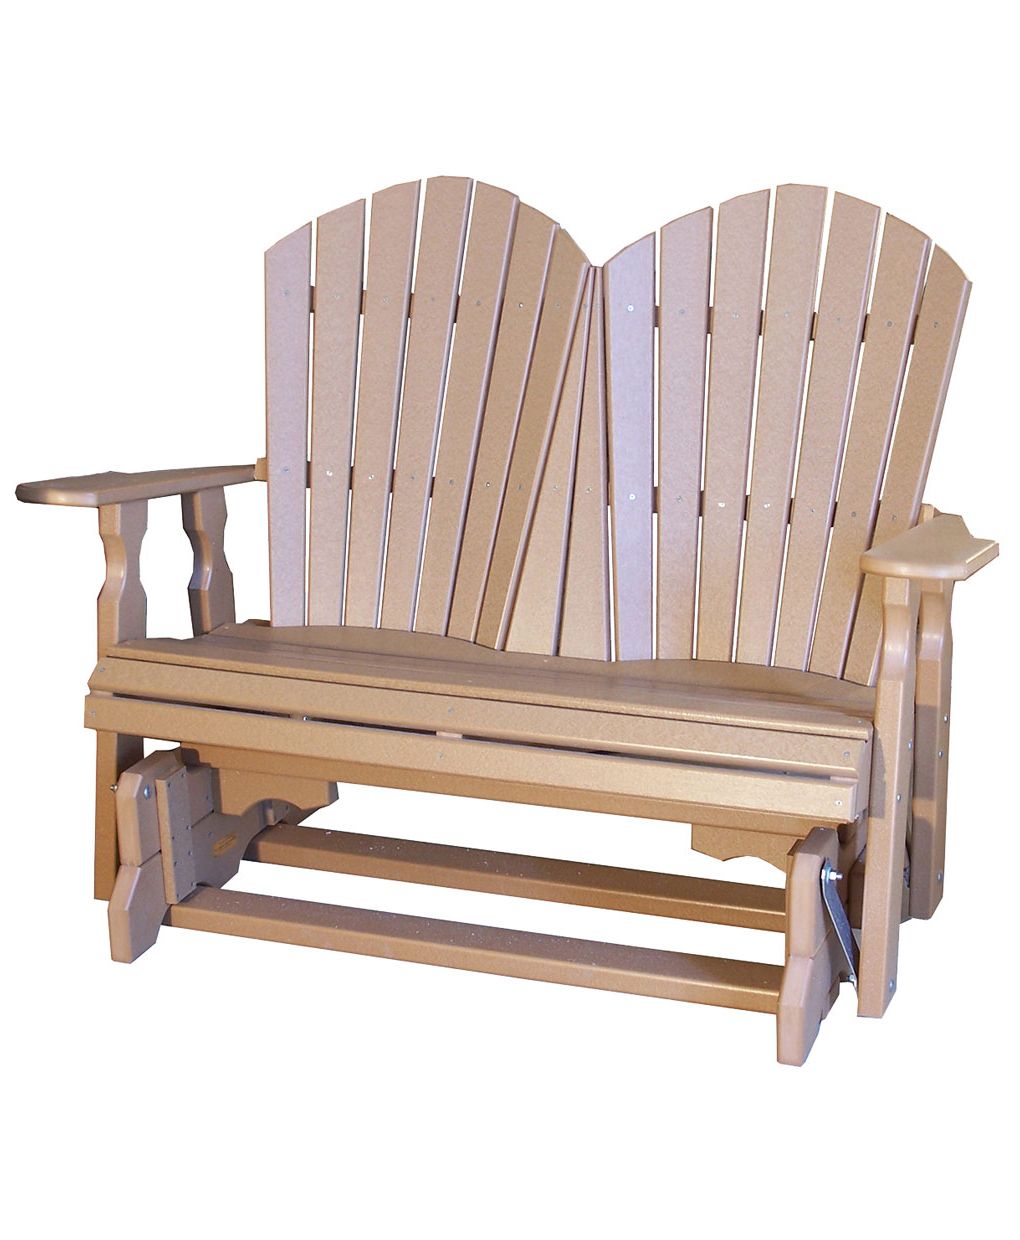 Poly Classic Loveseat Glider Throughout Current Classic Adirondack Glider Benches (View 15 of 30)